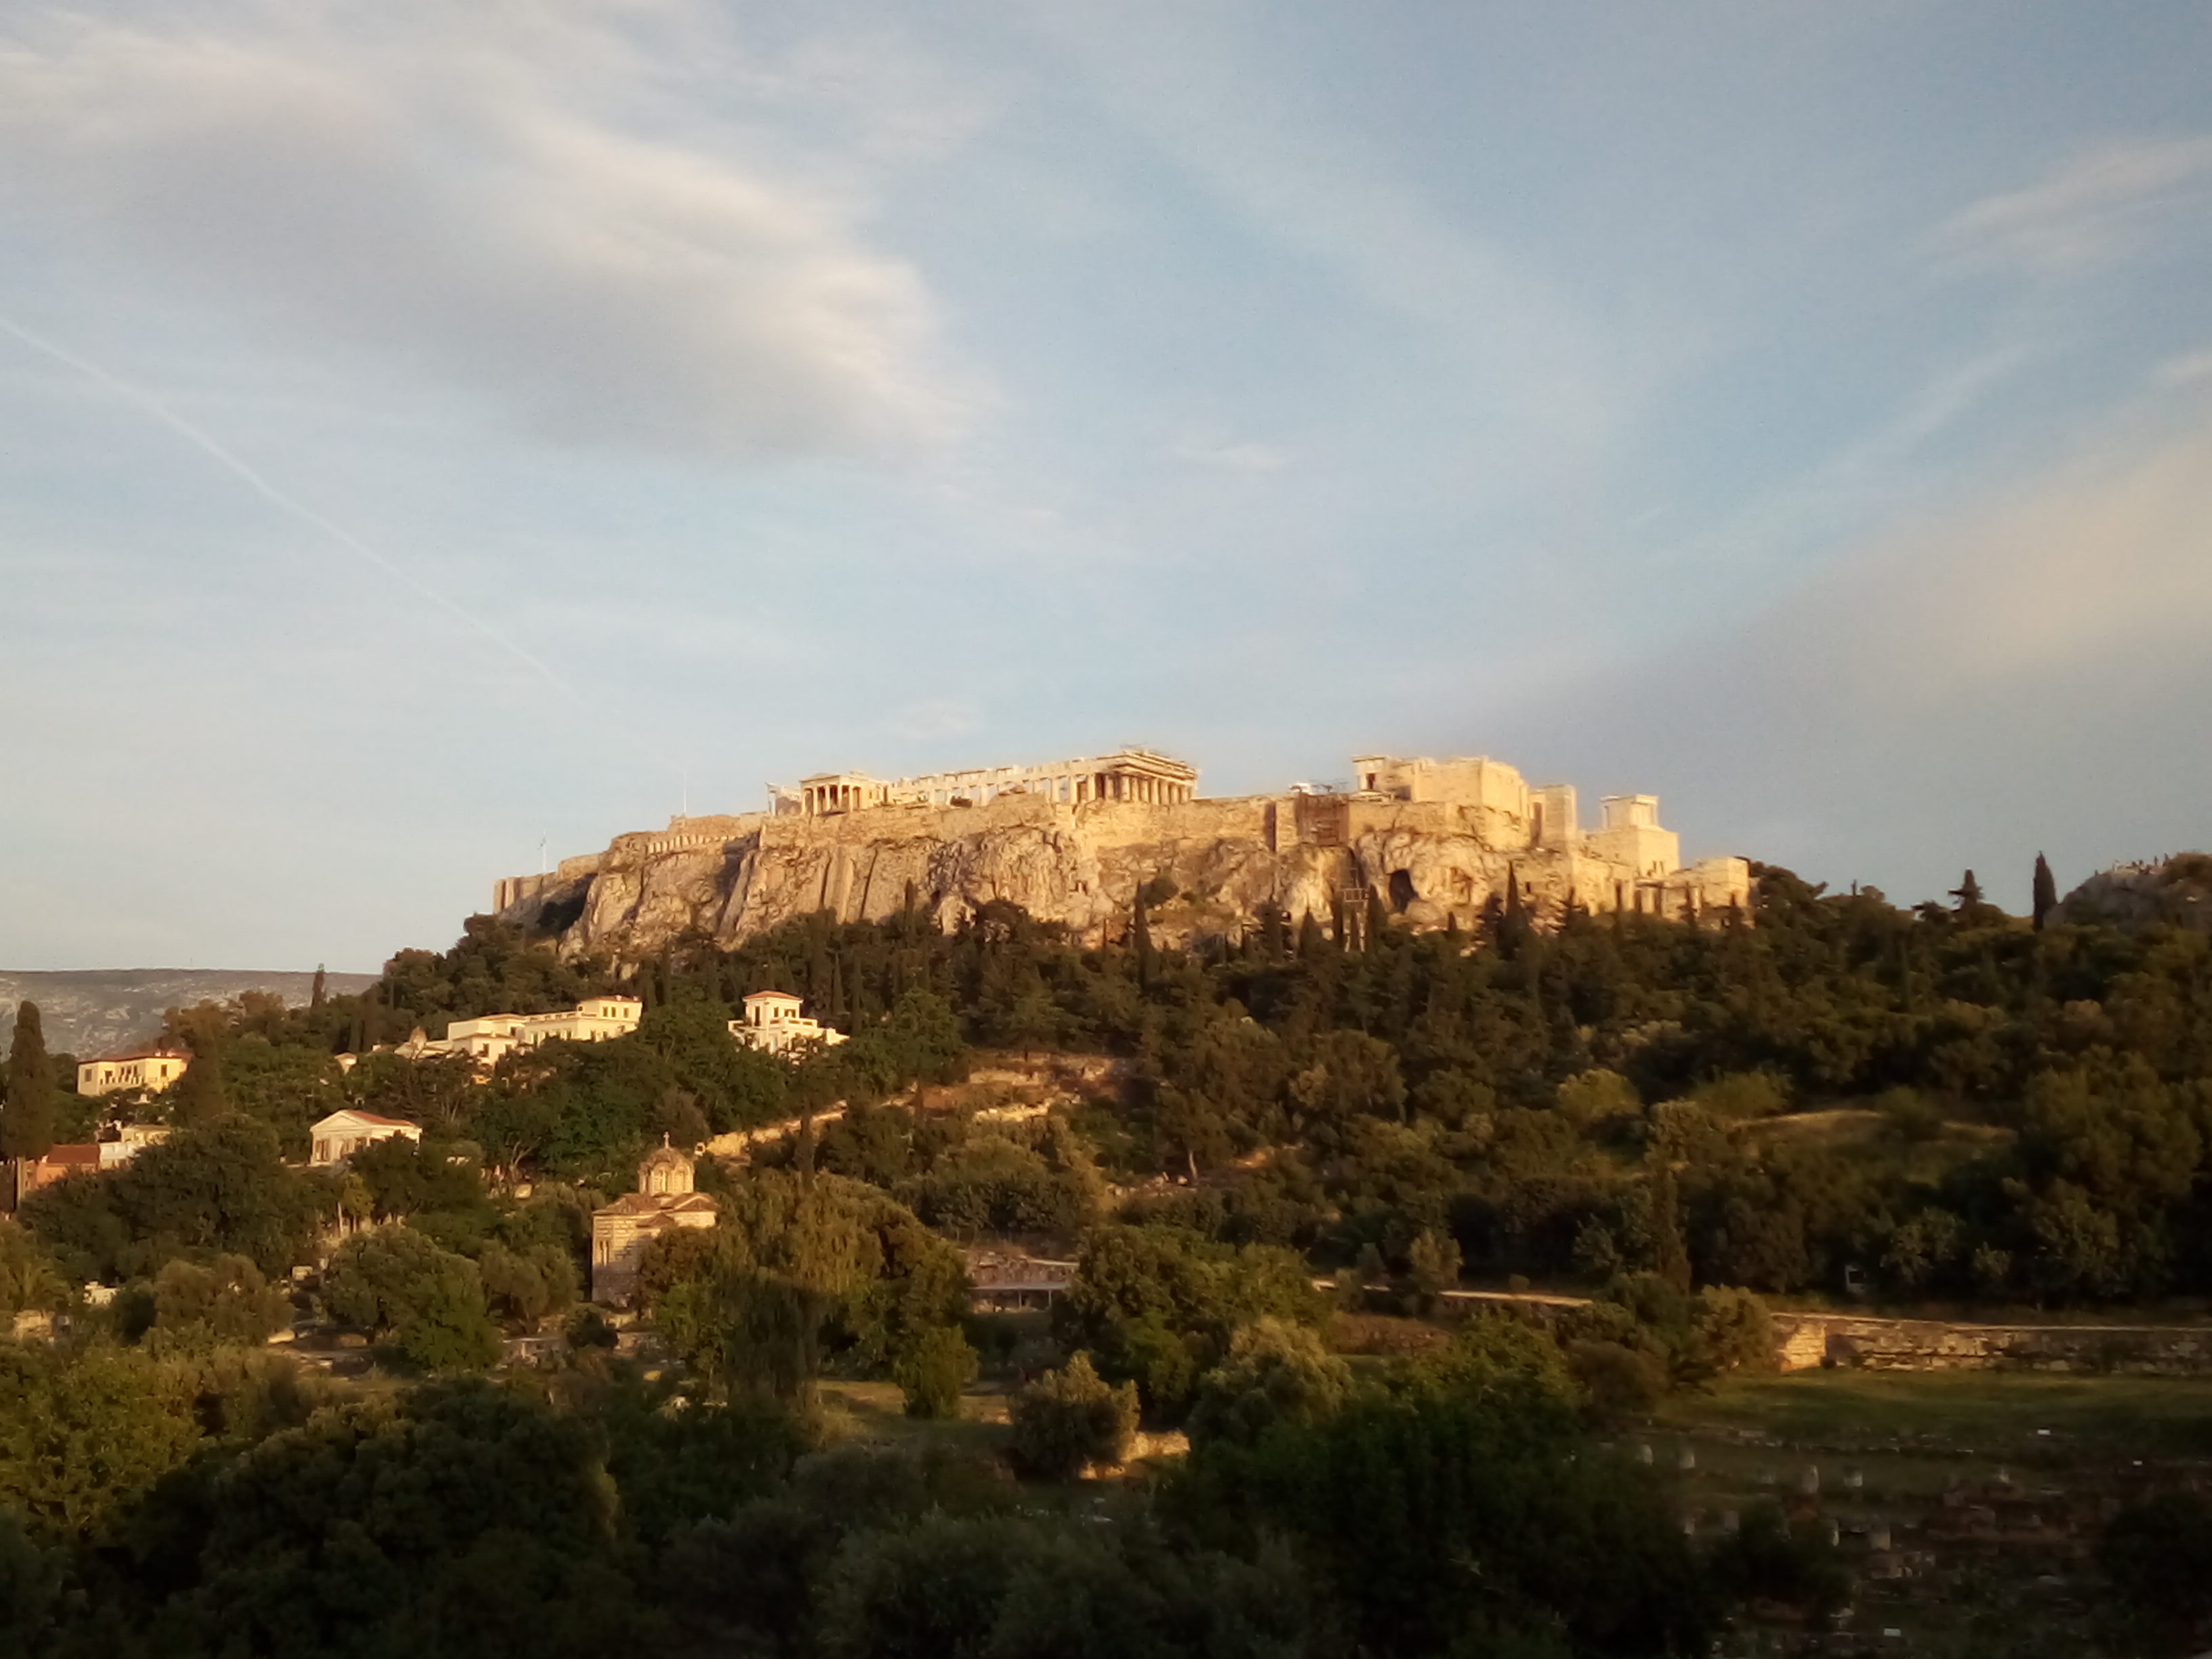 Acropolis in the sunset